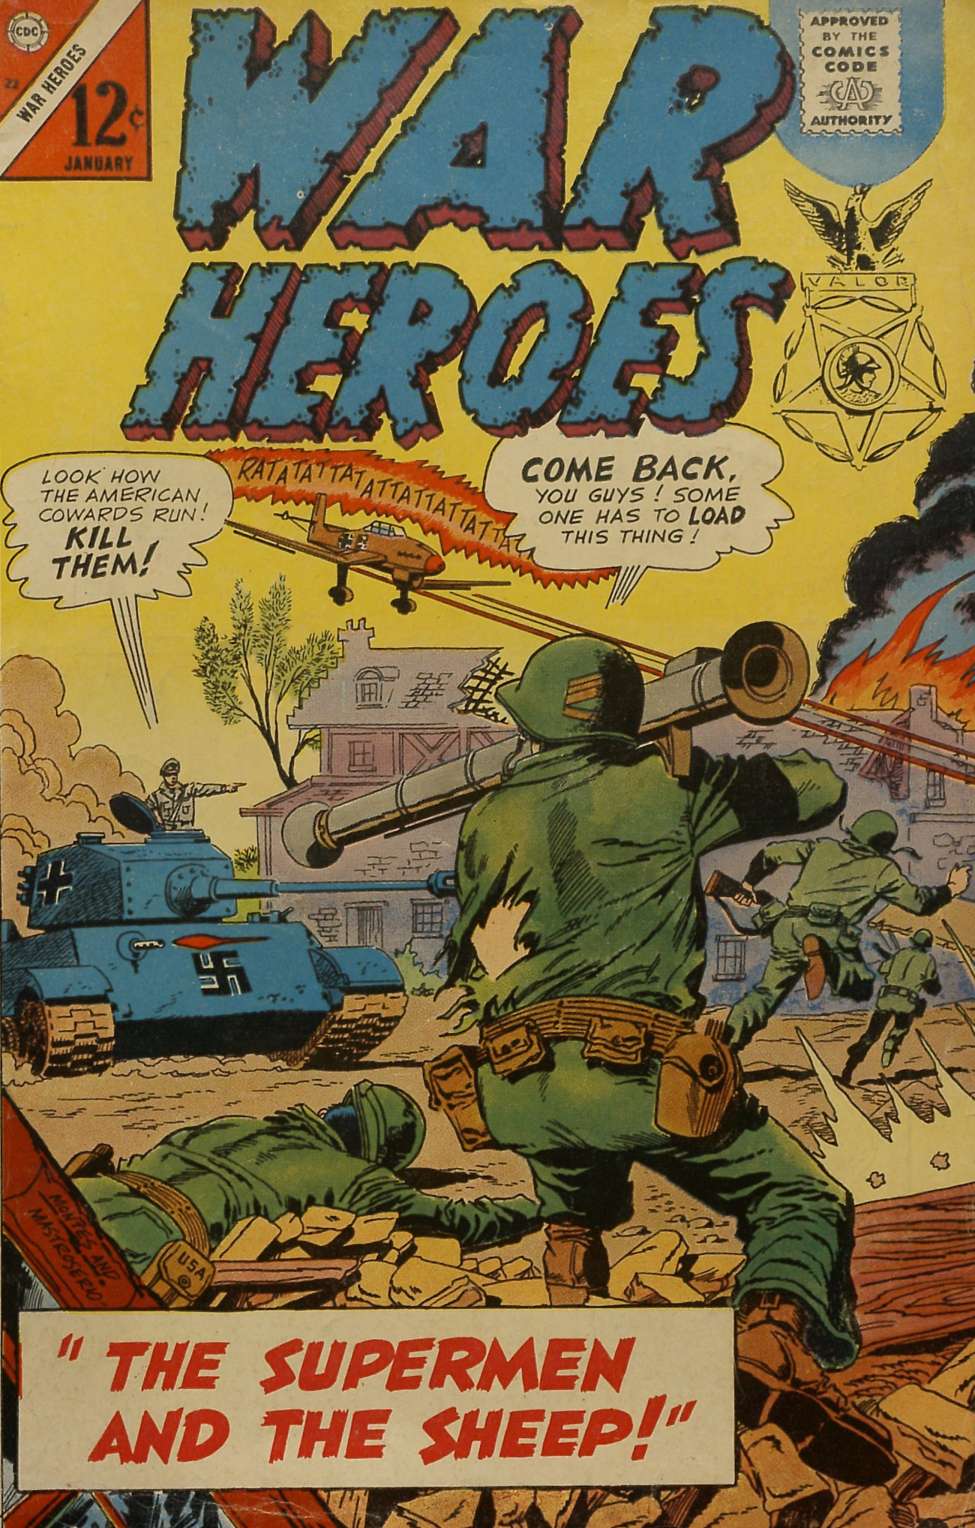 Book Cover For War Heroes 22 (alt) - Version 2